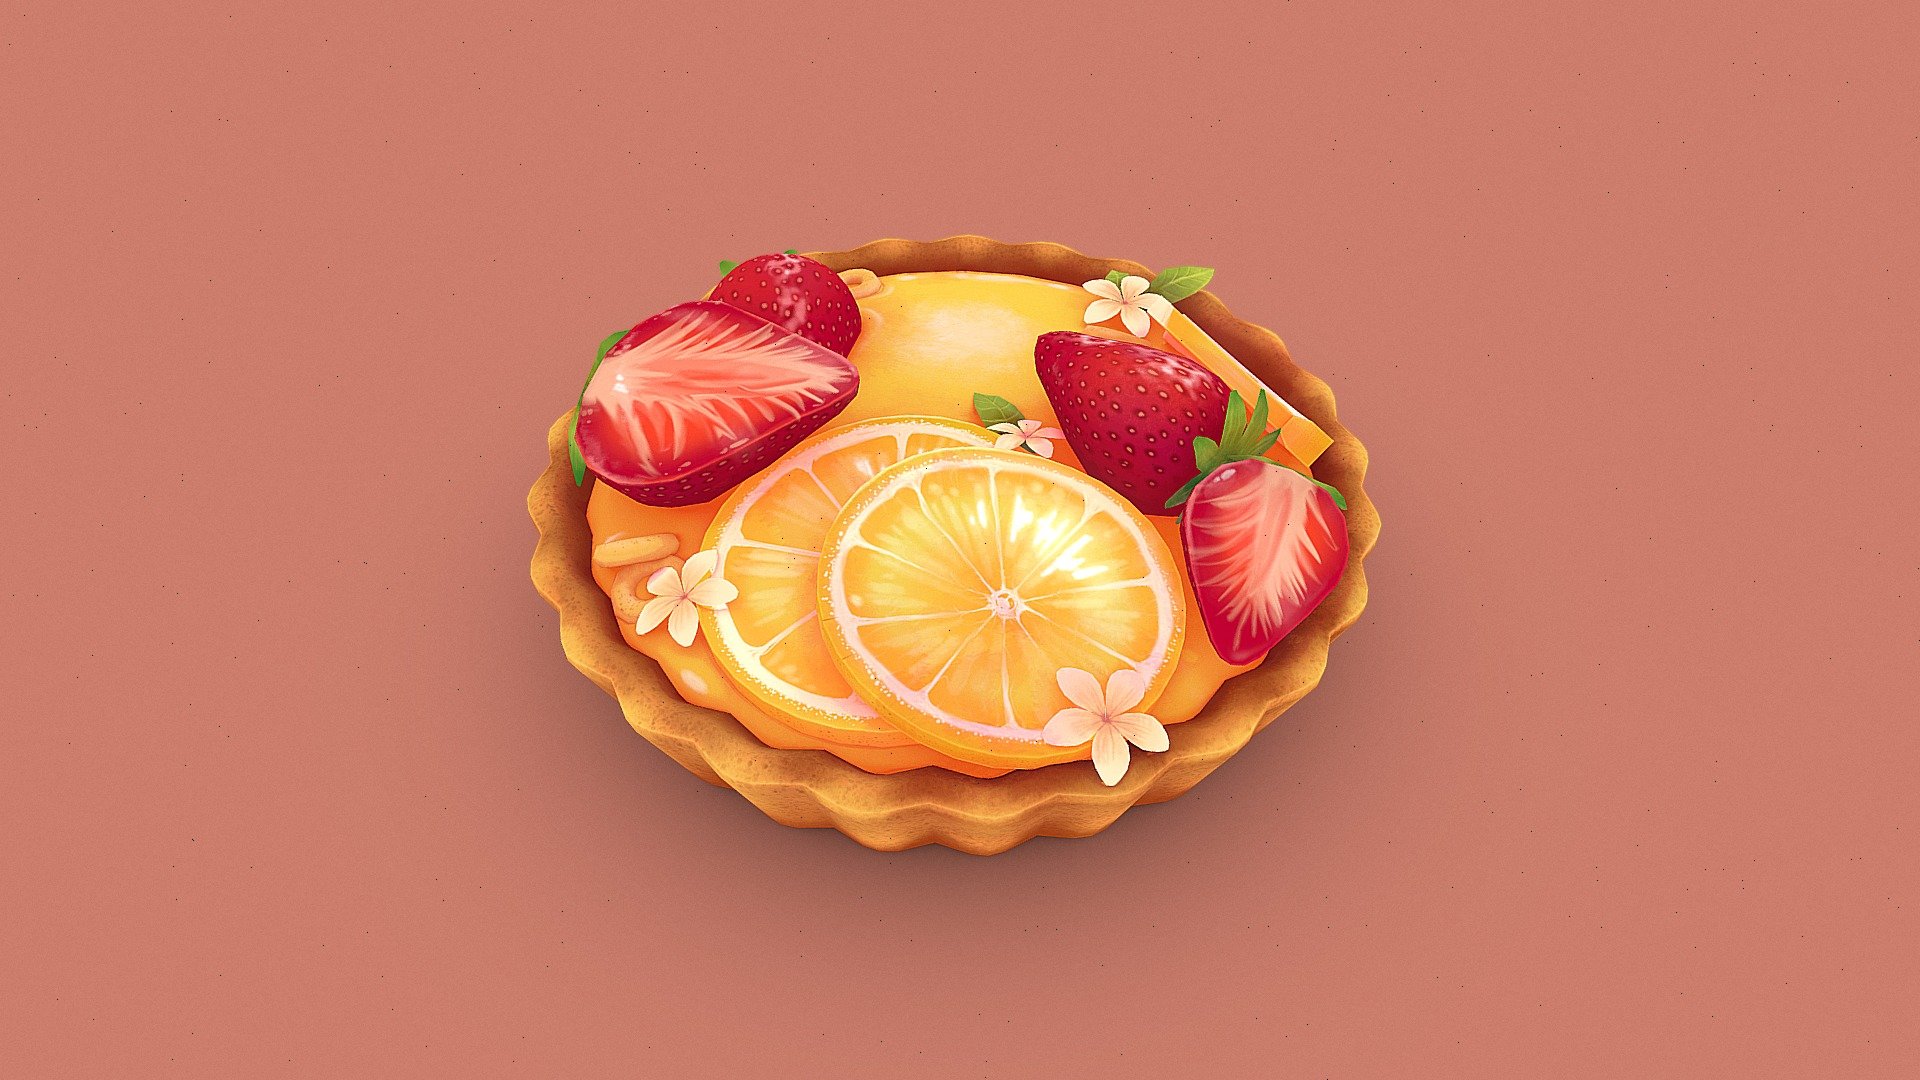 Obsessed with handpainted food so I wanted to give it a try !

Made with Blender and Substance Painter ~ - Lemon Pie ! - 3D model by DetectivePacha (@S.Pacha) 3d model